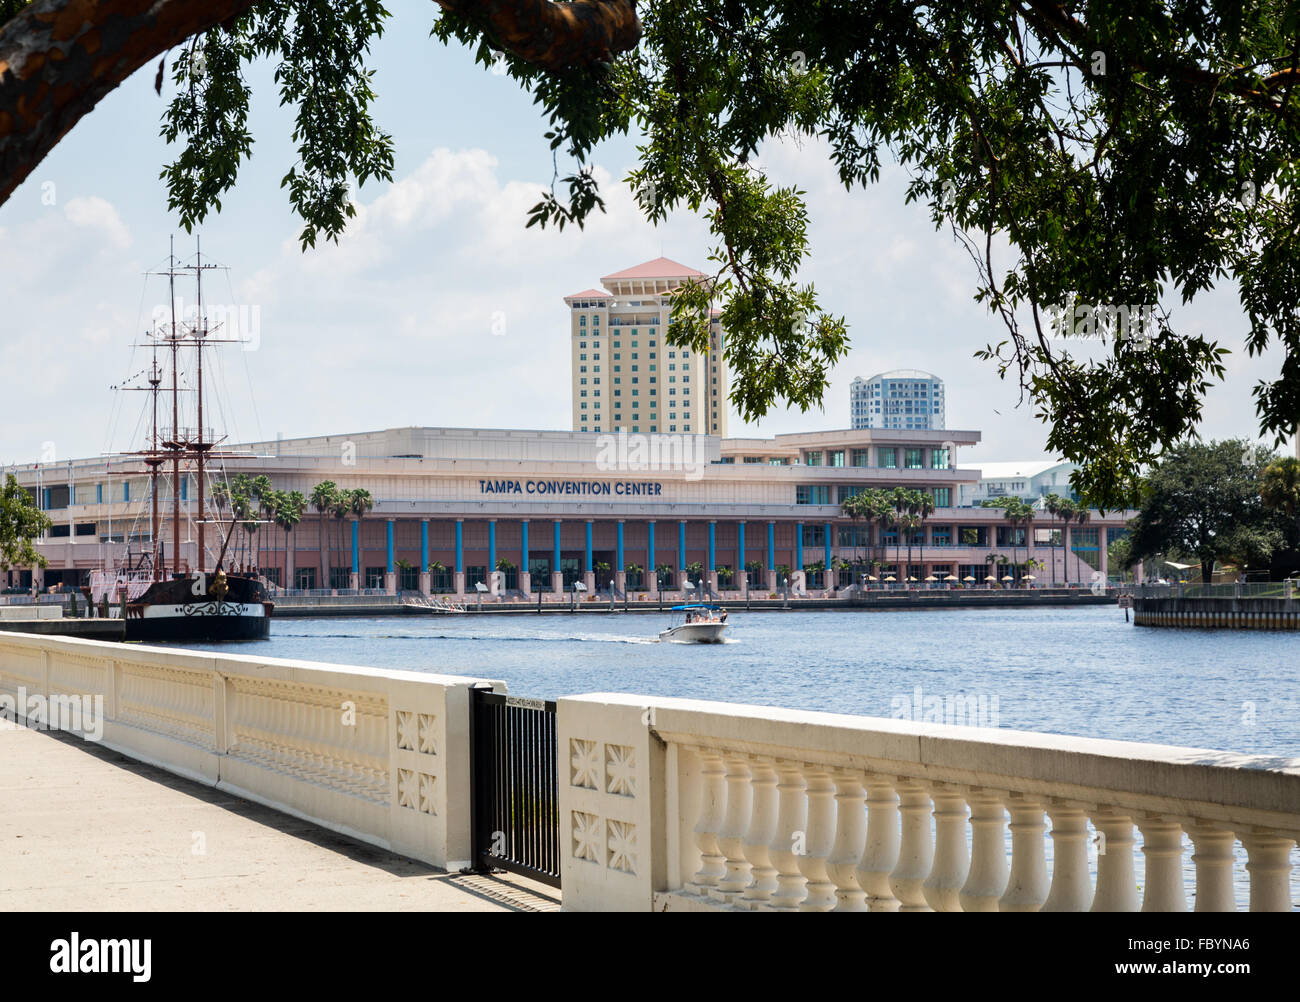 City skyline of Tampa Florida during the day Stock Photo